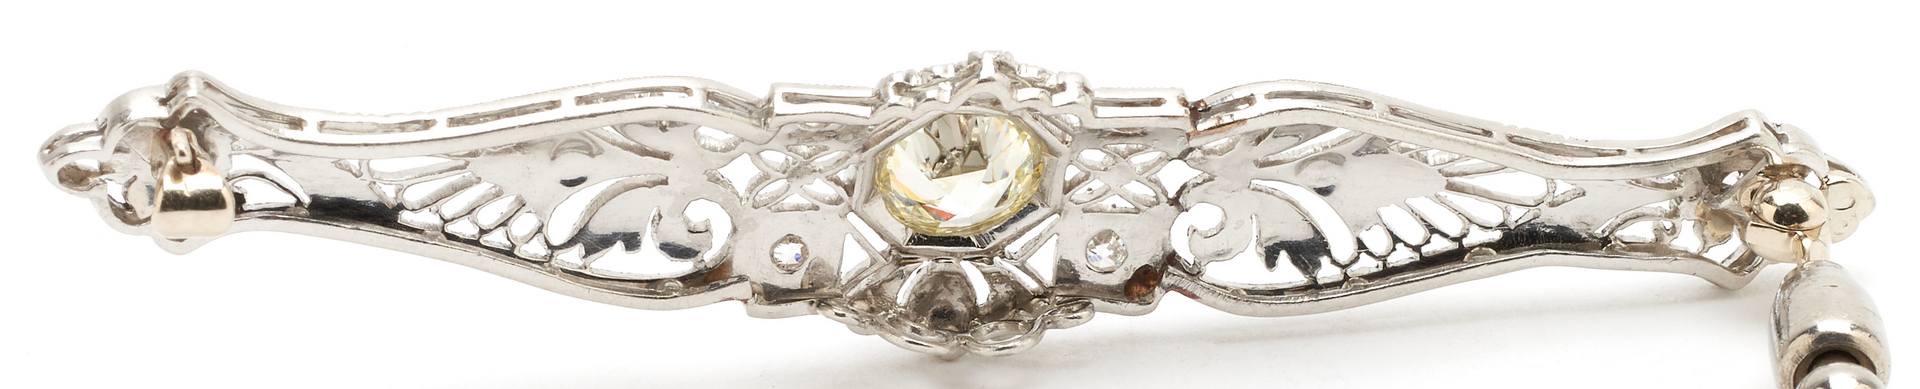 Lot 62: Art Deco Diamond brooch with 1.26 ct old Euro cut